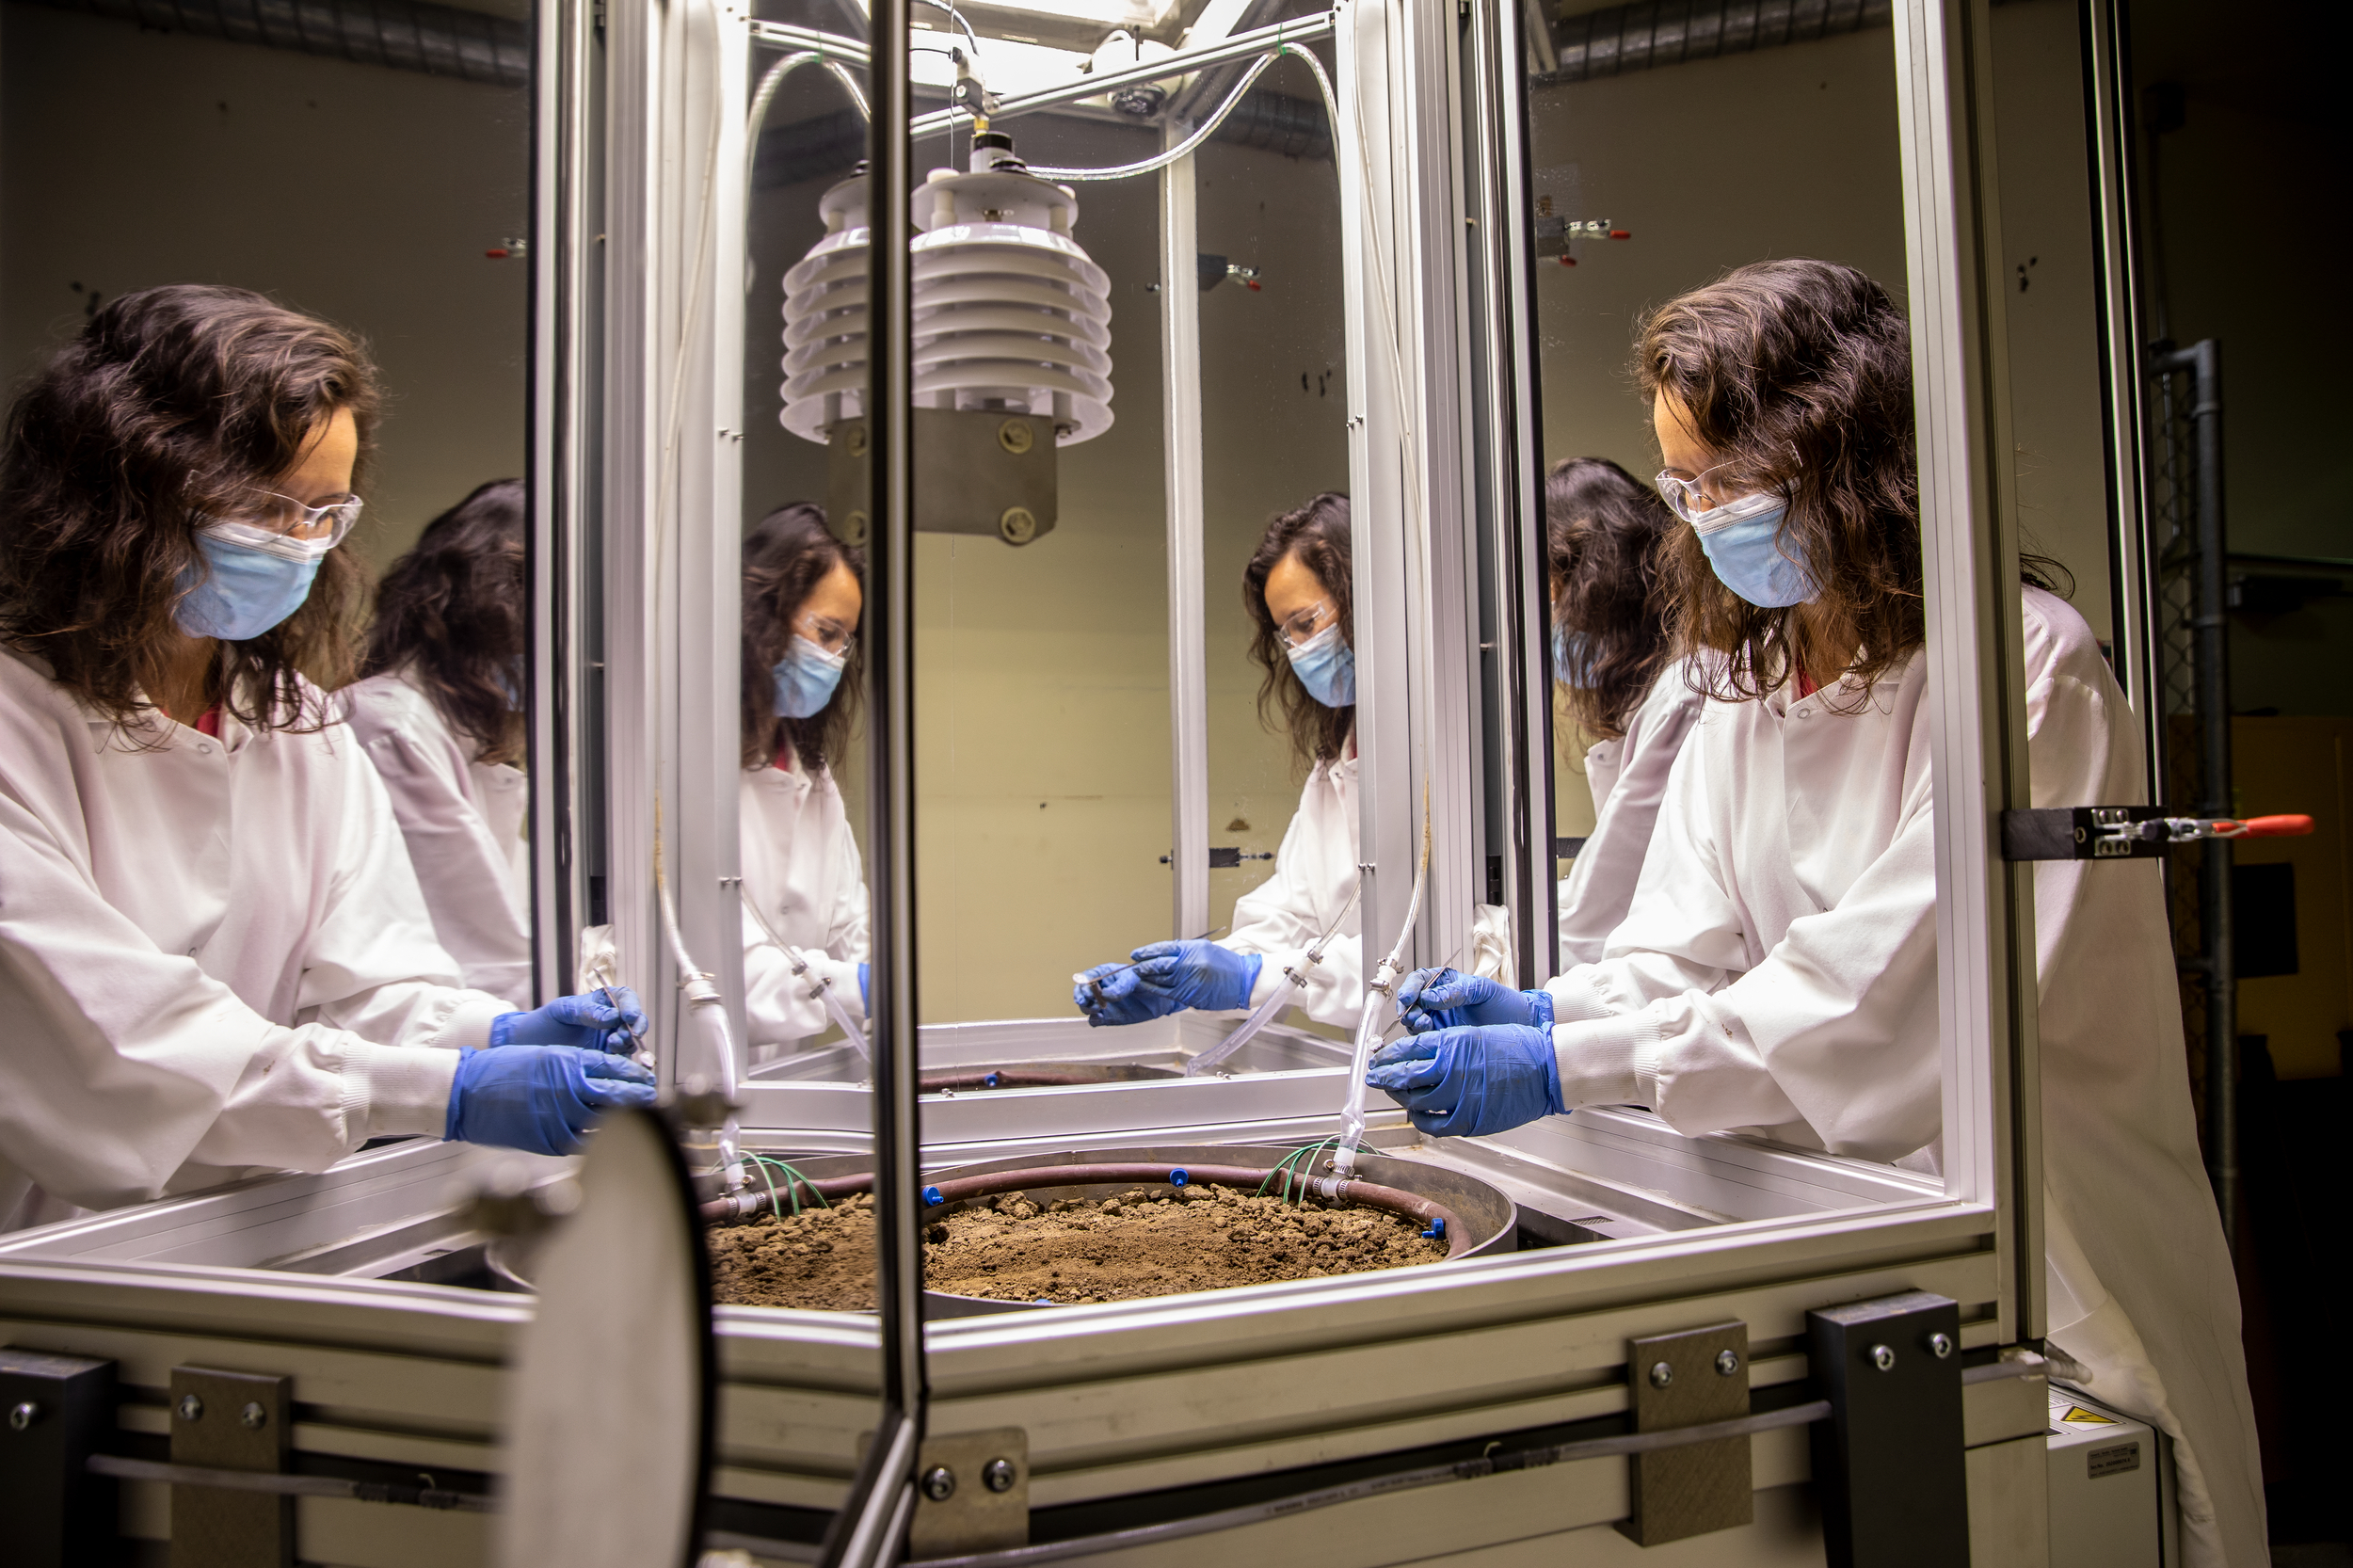 Esther Singer works on collecting soil samples from the newly installed EcoPOD at Lawrence Berkeley National Laboratory